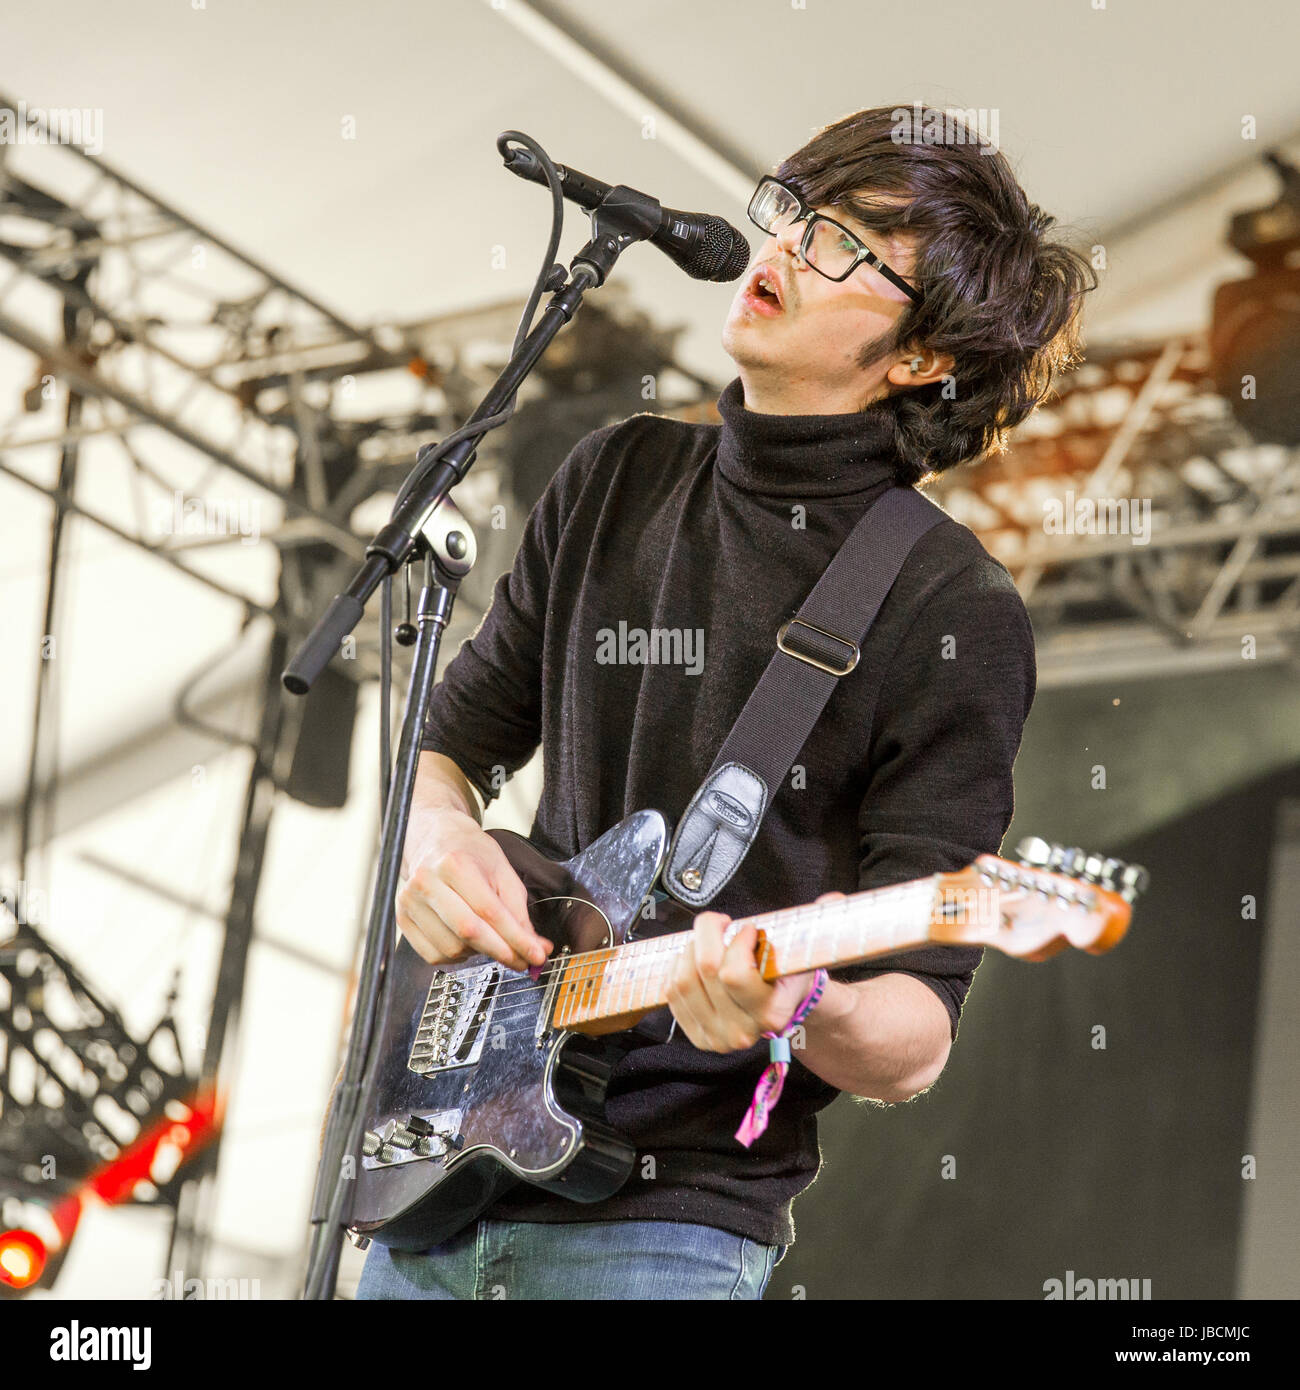 Manchester, Tennessee, USA. 9th June, 2017. WILL TOLEDO of Car Seat Headrest during Bonnaroo Music and Arts Festival at Great Stage Park in Manchester, Tennessee Credit: Daniel DeSlover/ZUMA Wire/Alamy Live News Stock Photo